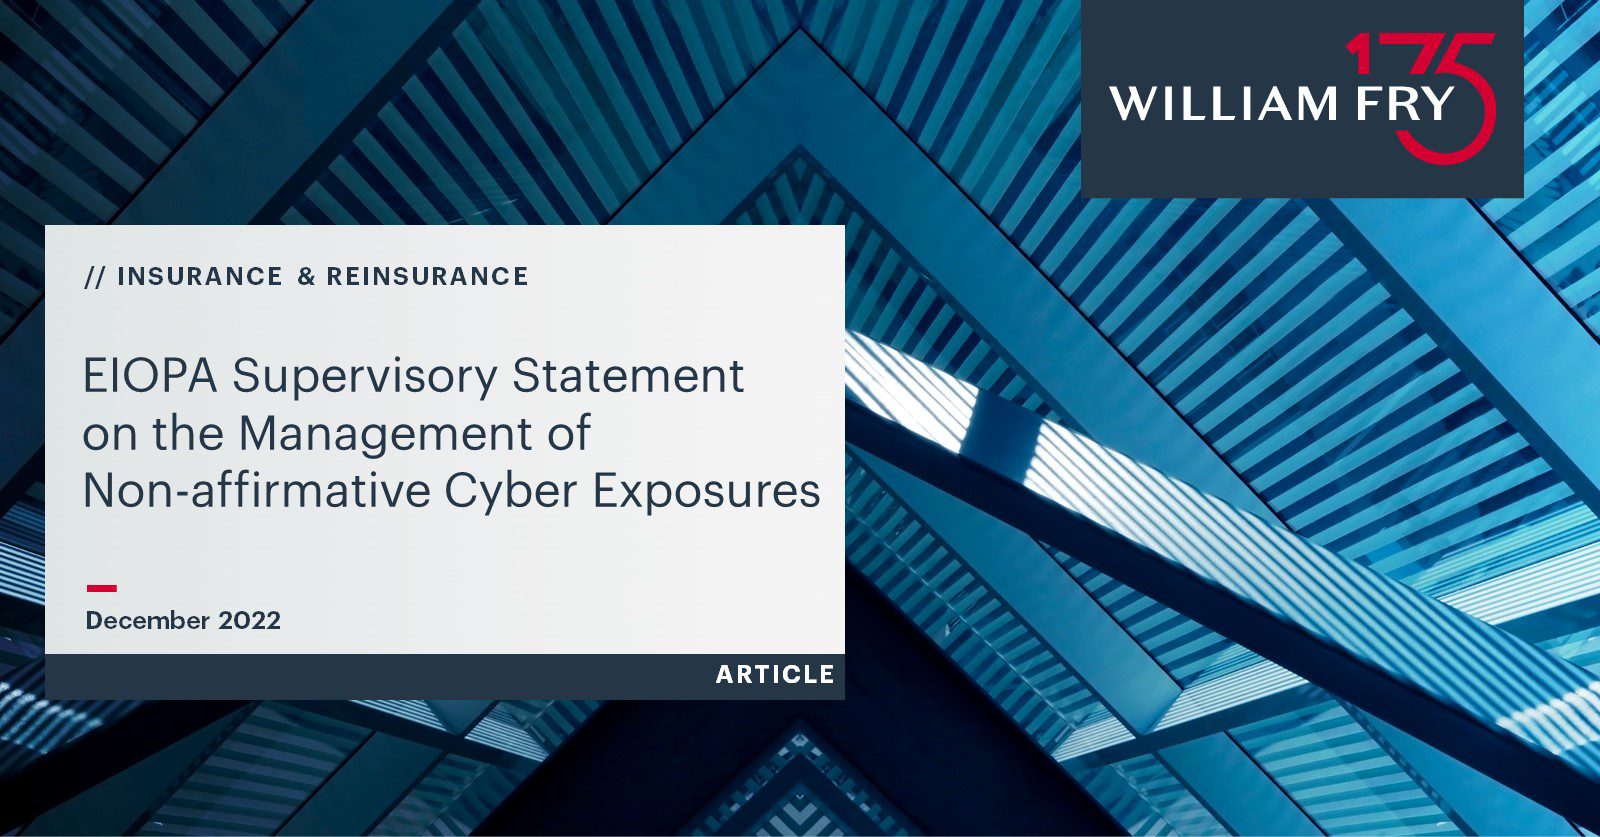 EIOPA Supervisory Statement on the Management of Non-affirmative Cyber Exposures